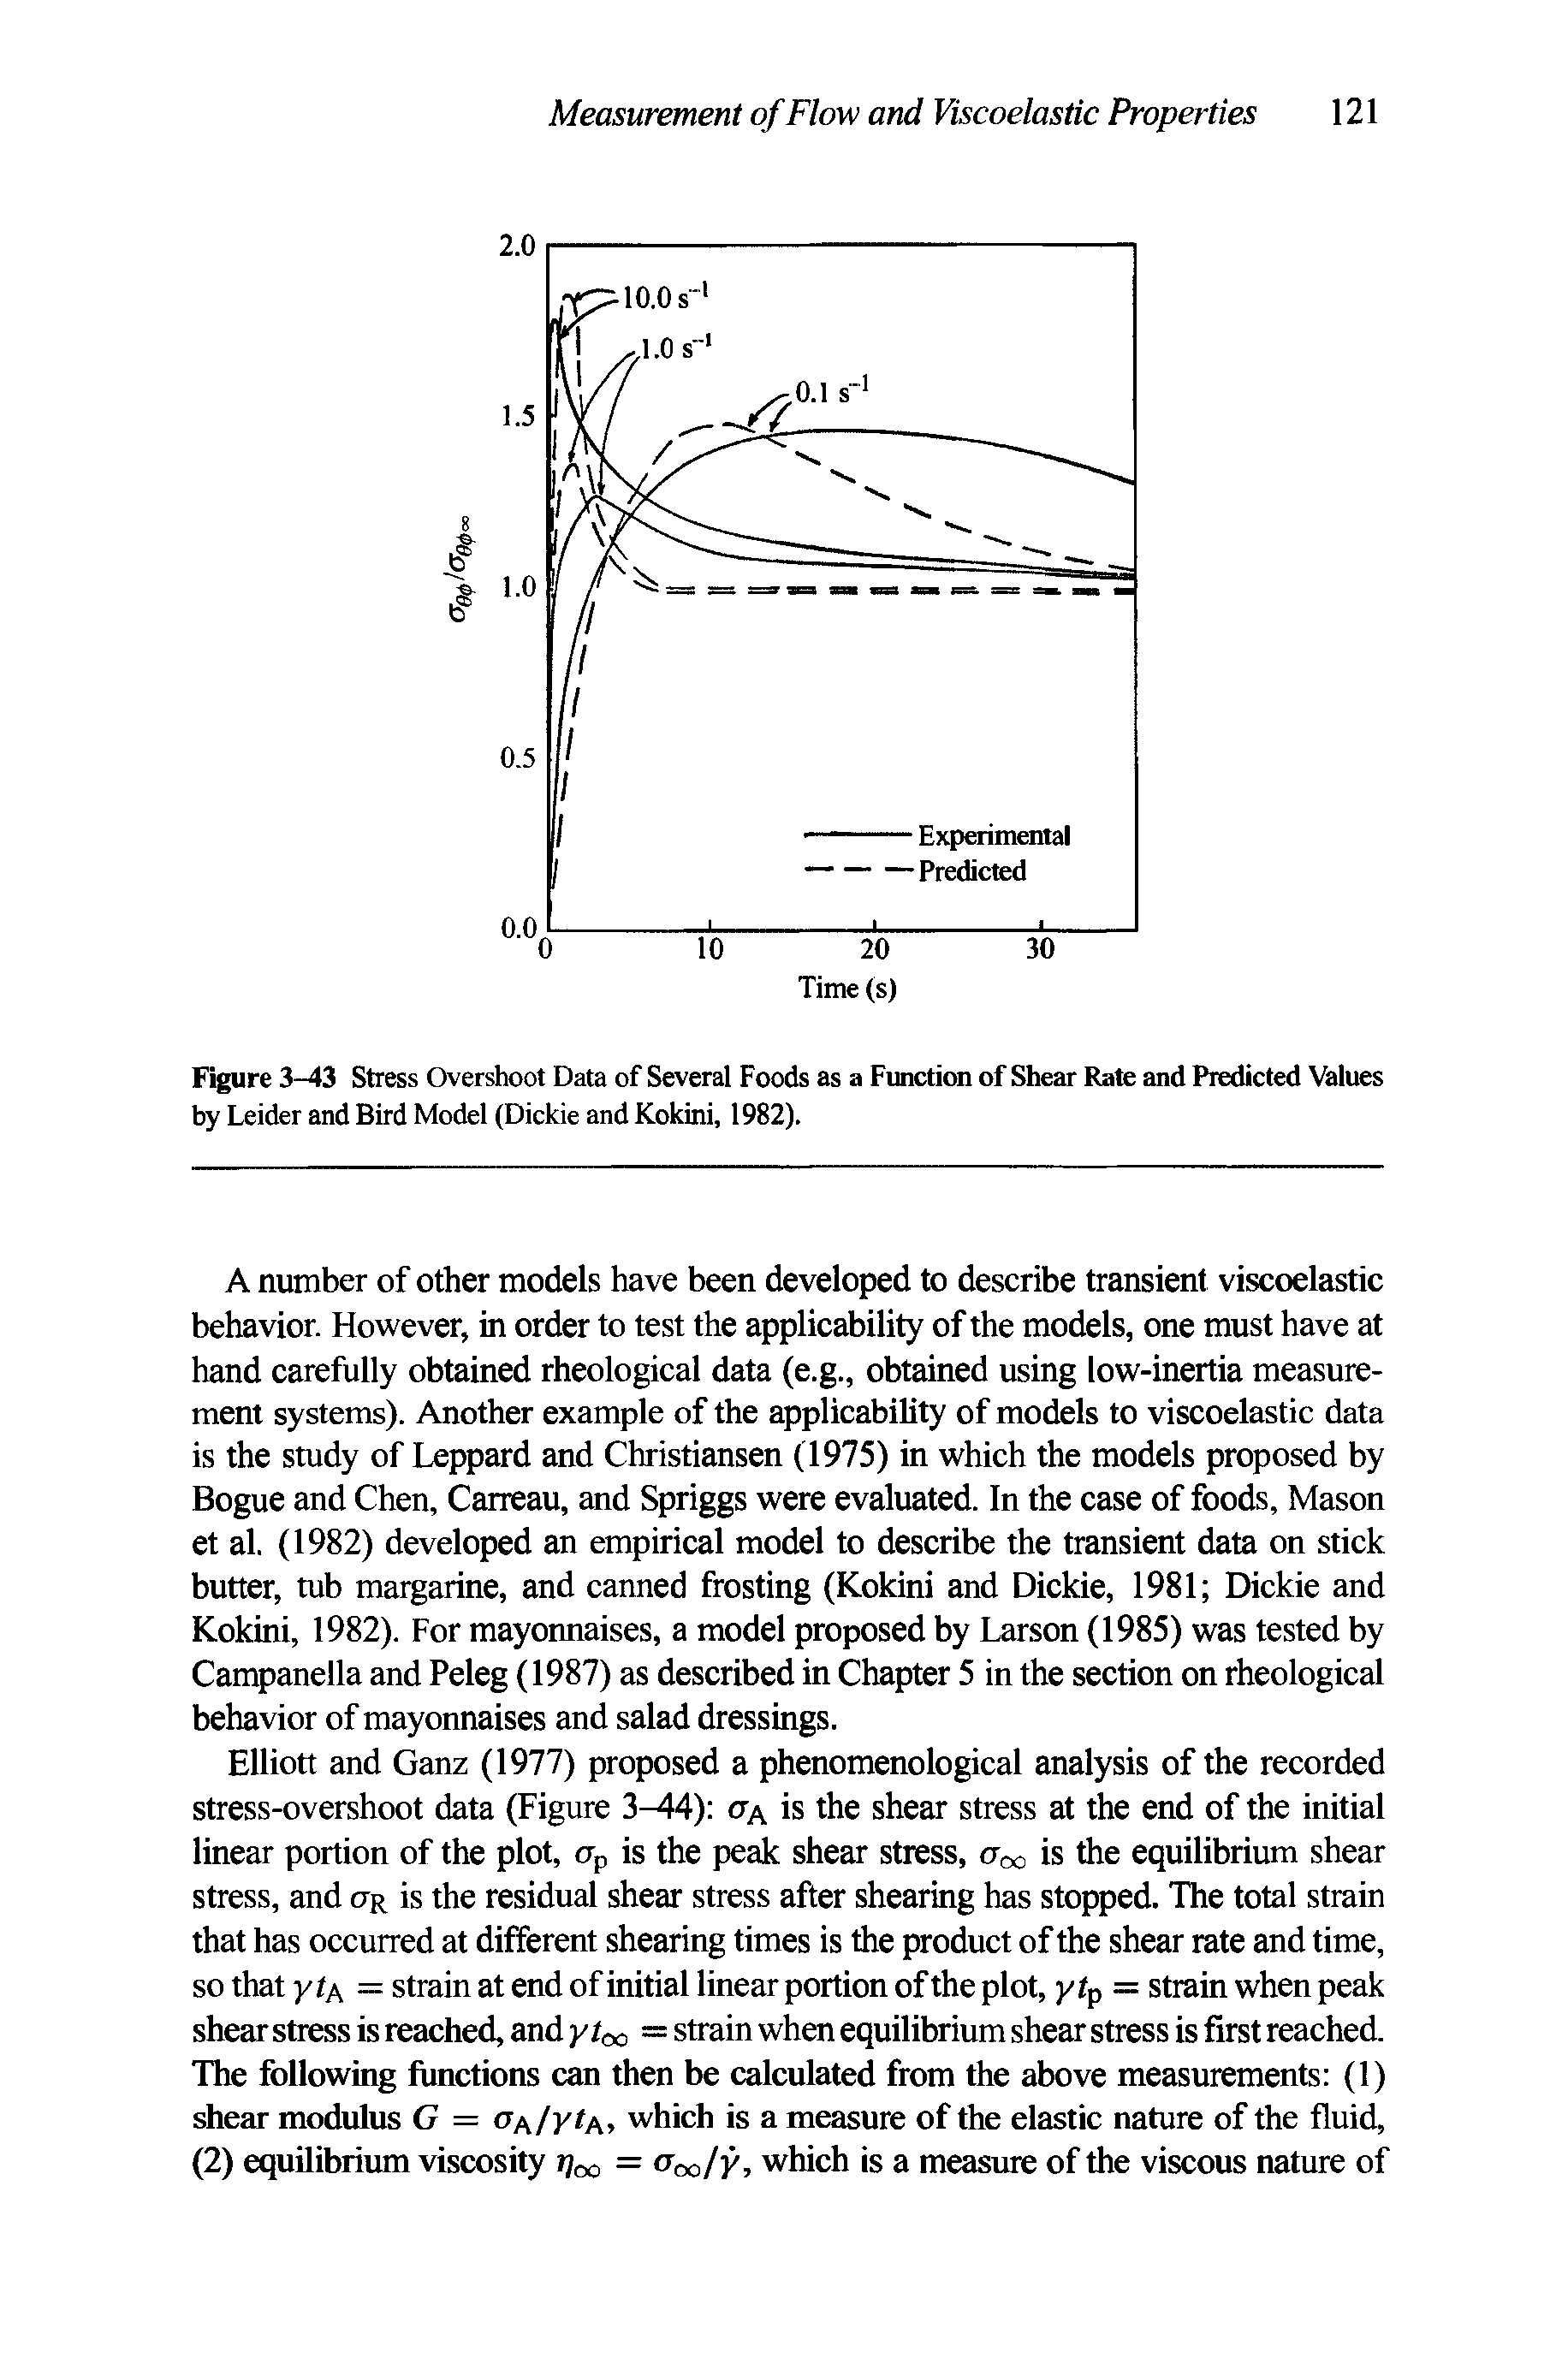 Figure 3-43 Stress Overshoot Data of Several Foods as a Function of Shear Rate and Predicted Values by Leider and Bird Model (Dickie and Kokini, 1982).